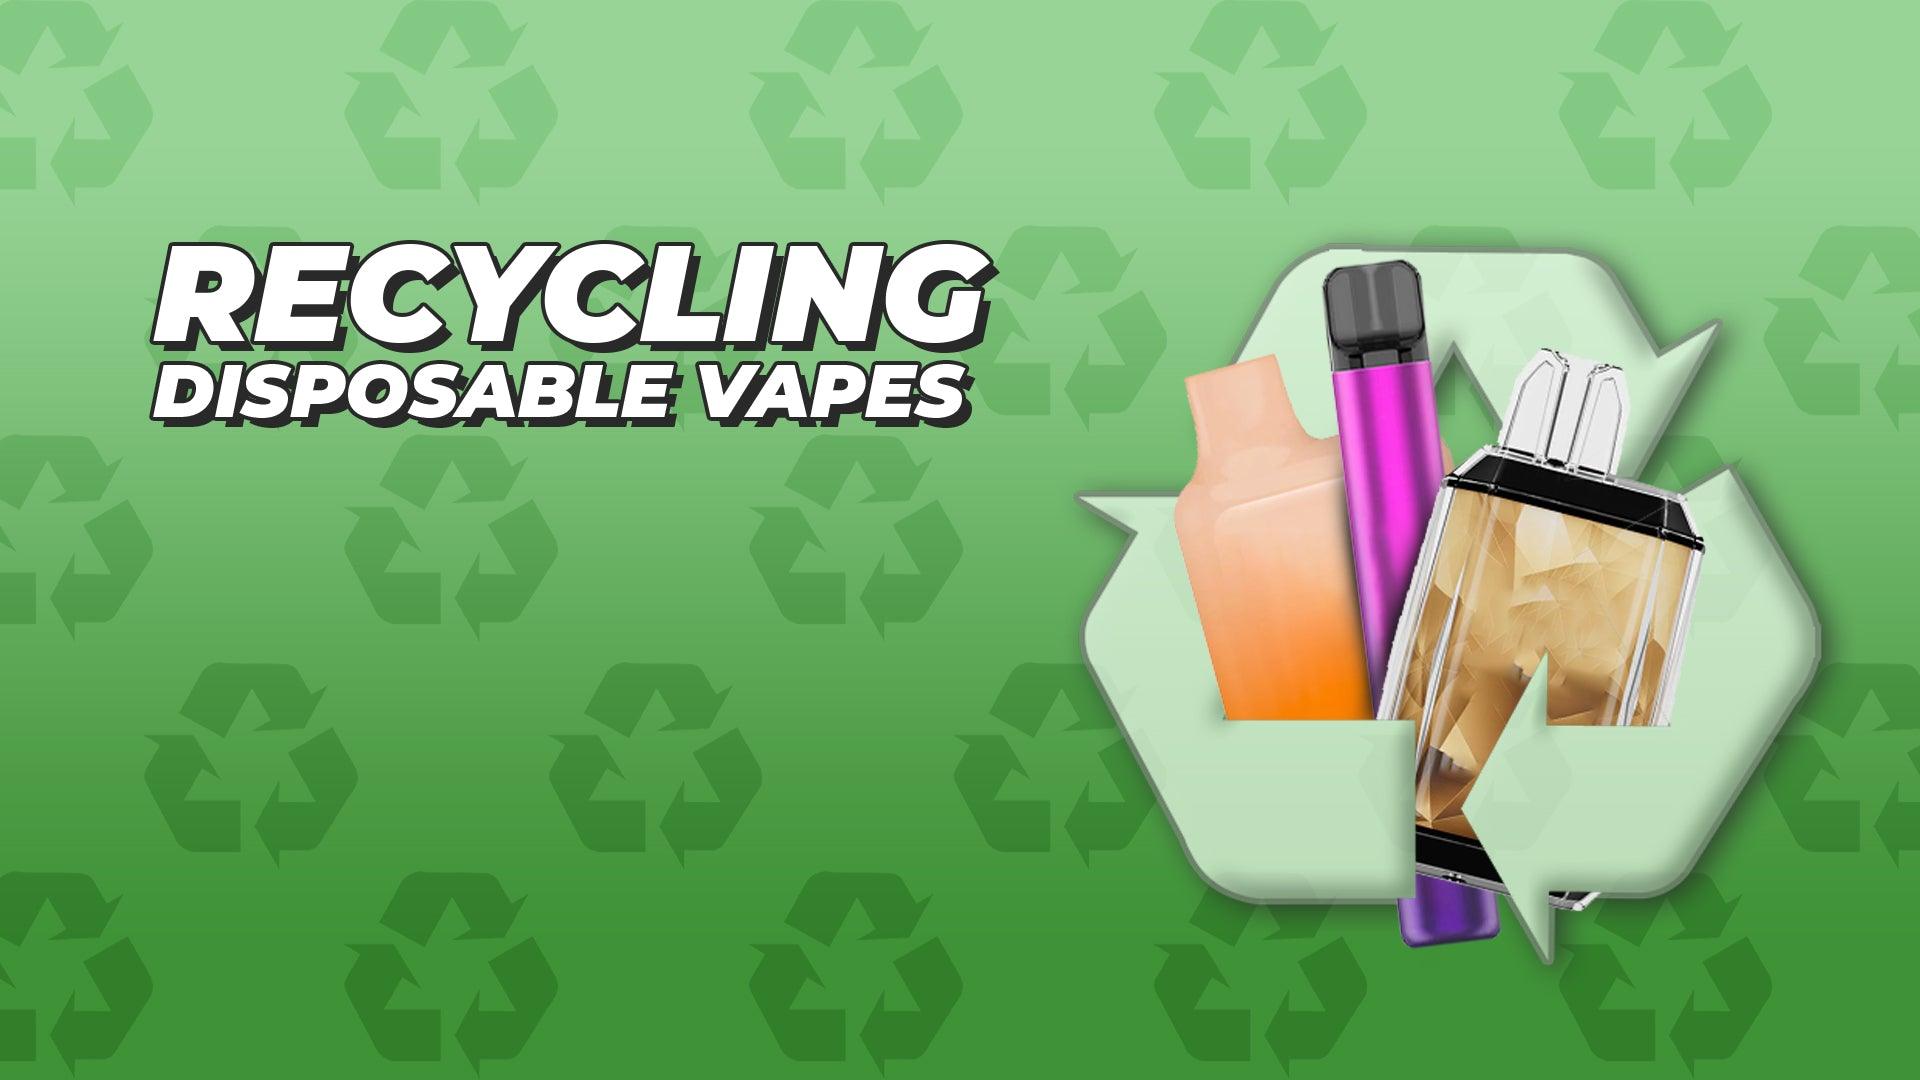 Recycling Disposable Vapes - Category:Vape Kits, Sub Category:Disposables